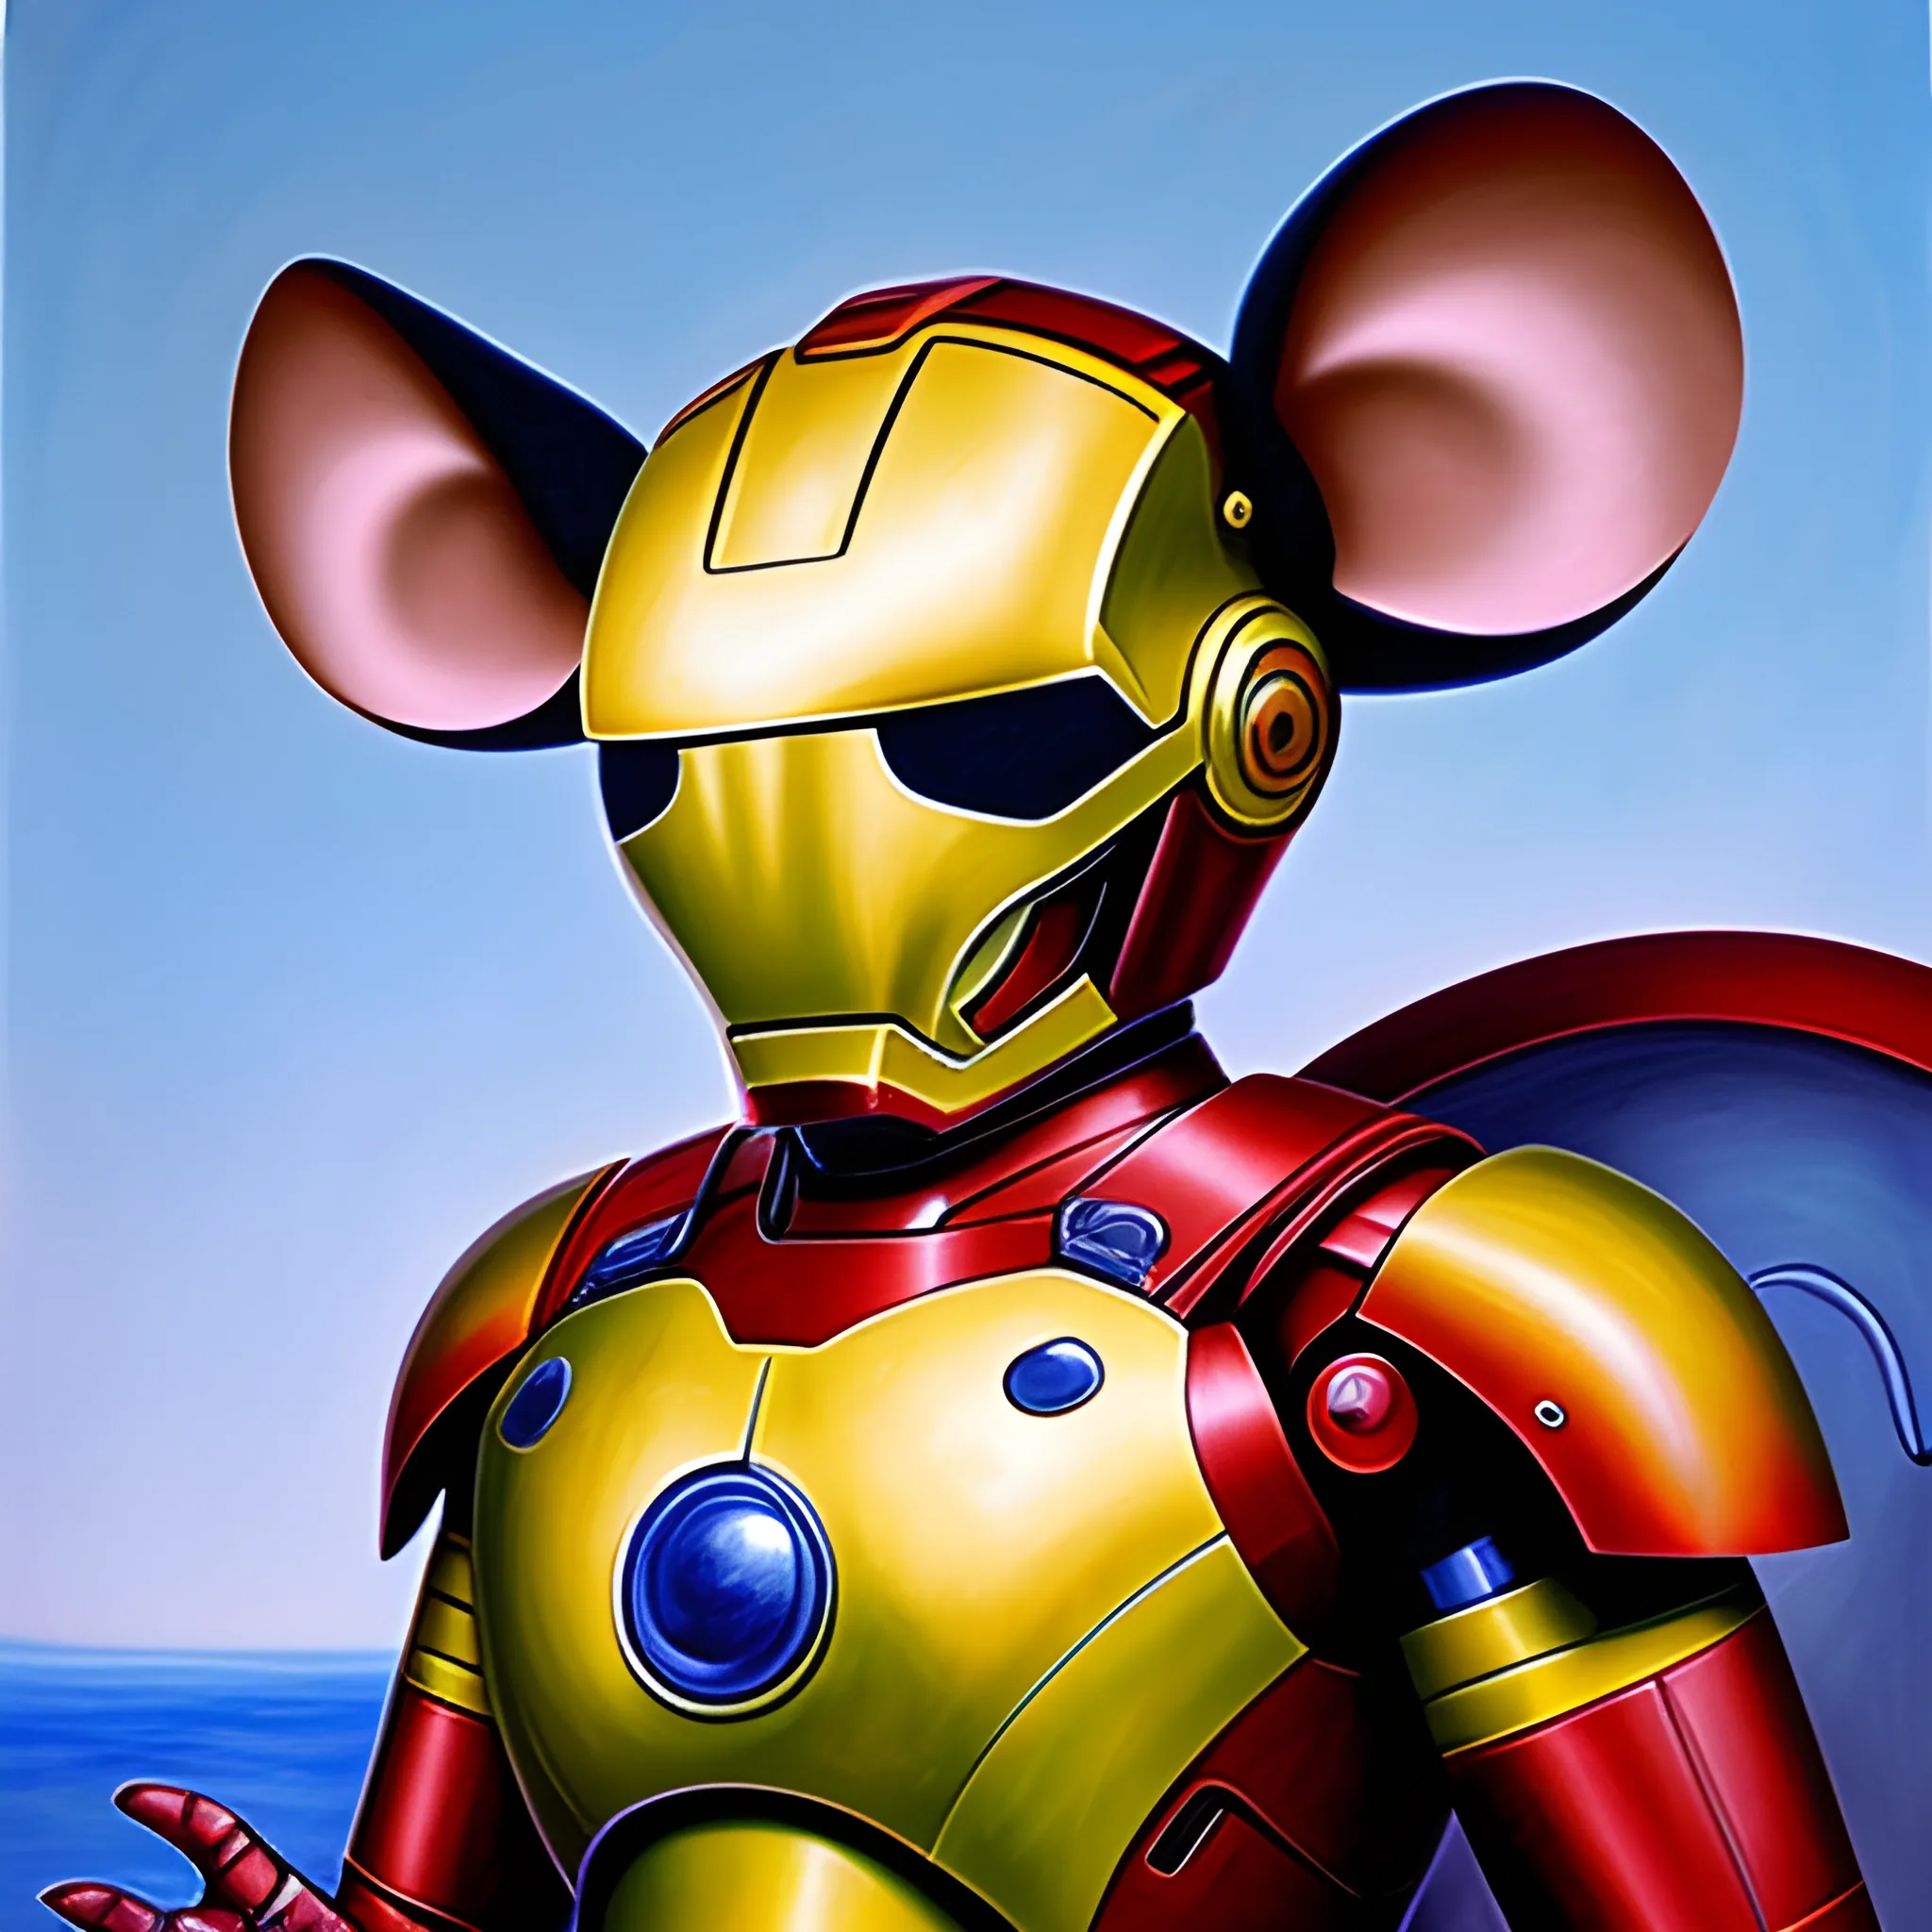 General Mouse is wearing armor. , Oil Painting, Trippy，Just like Iron Man